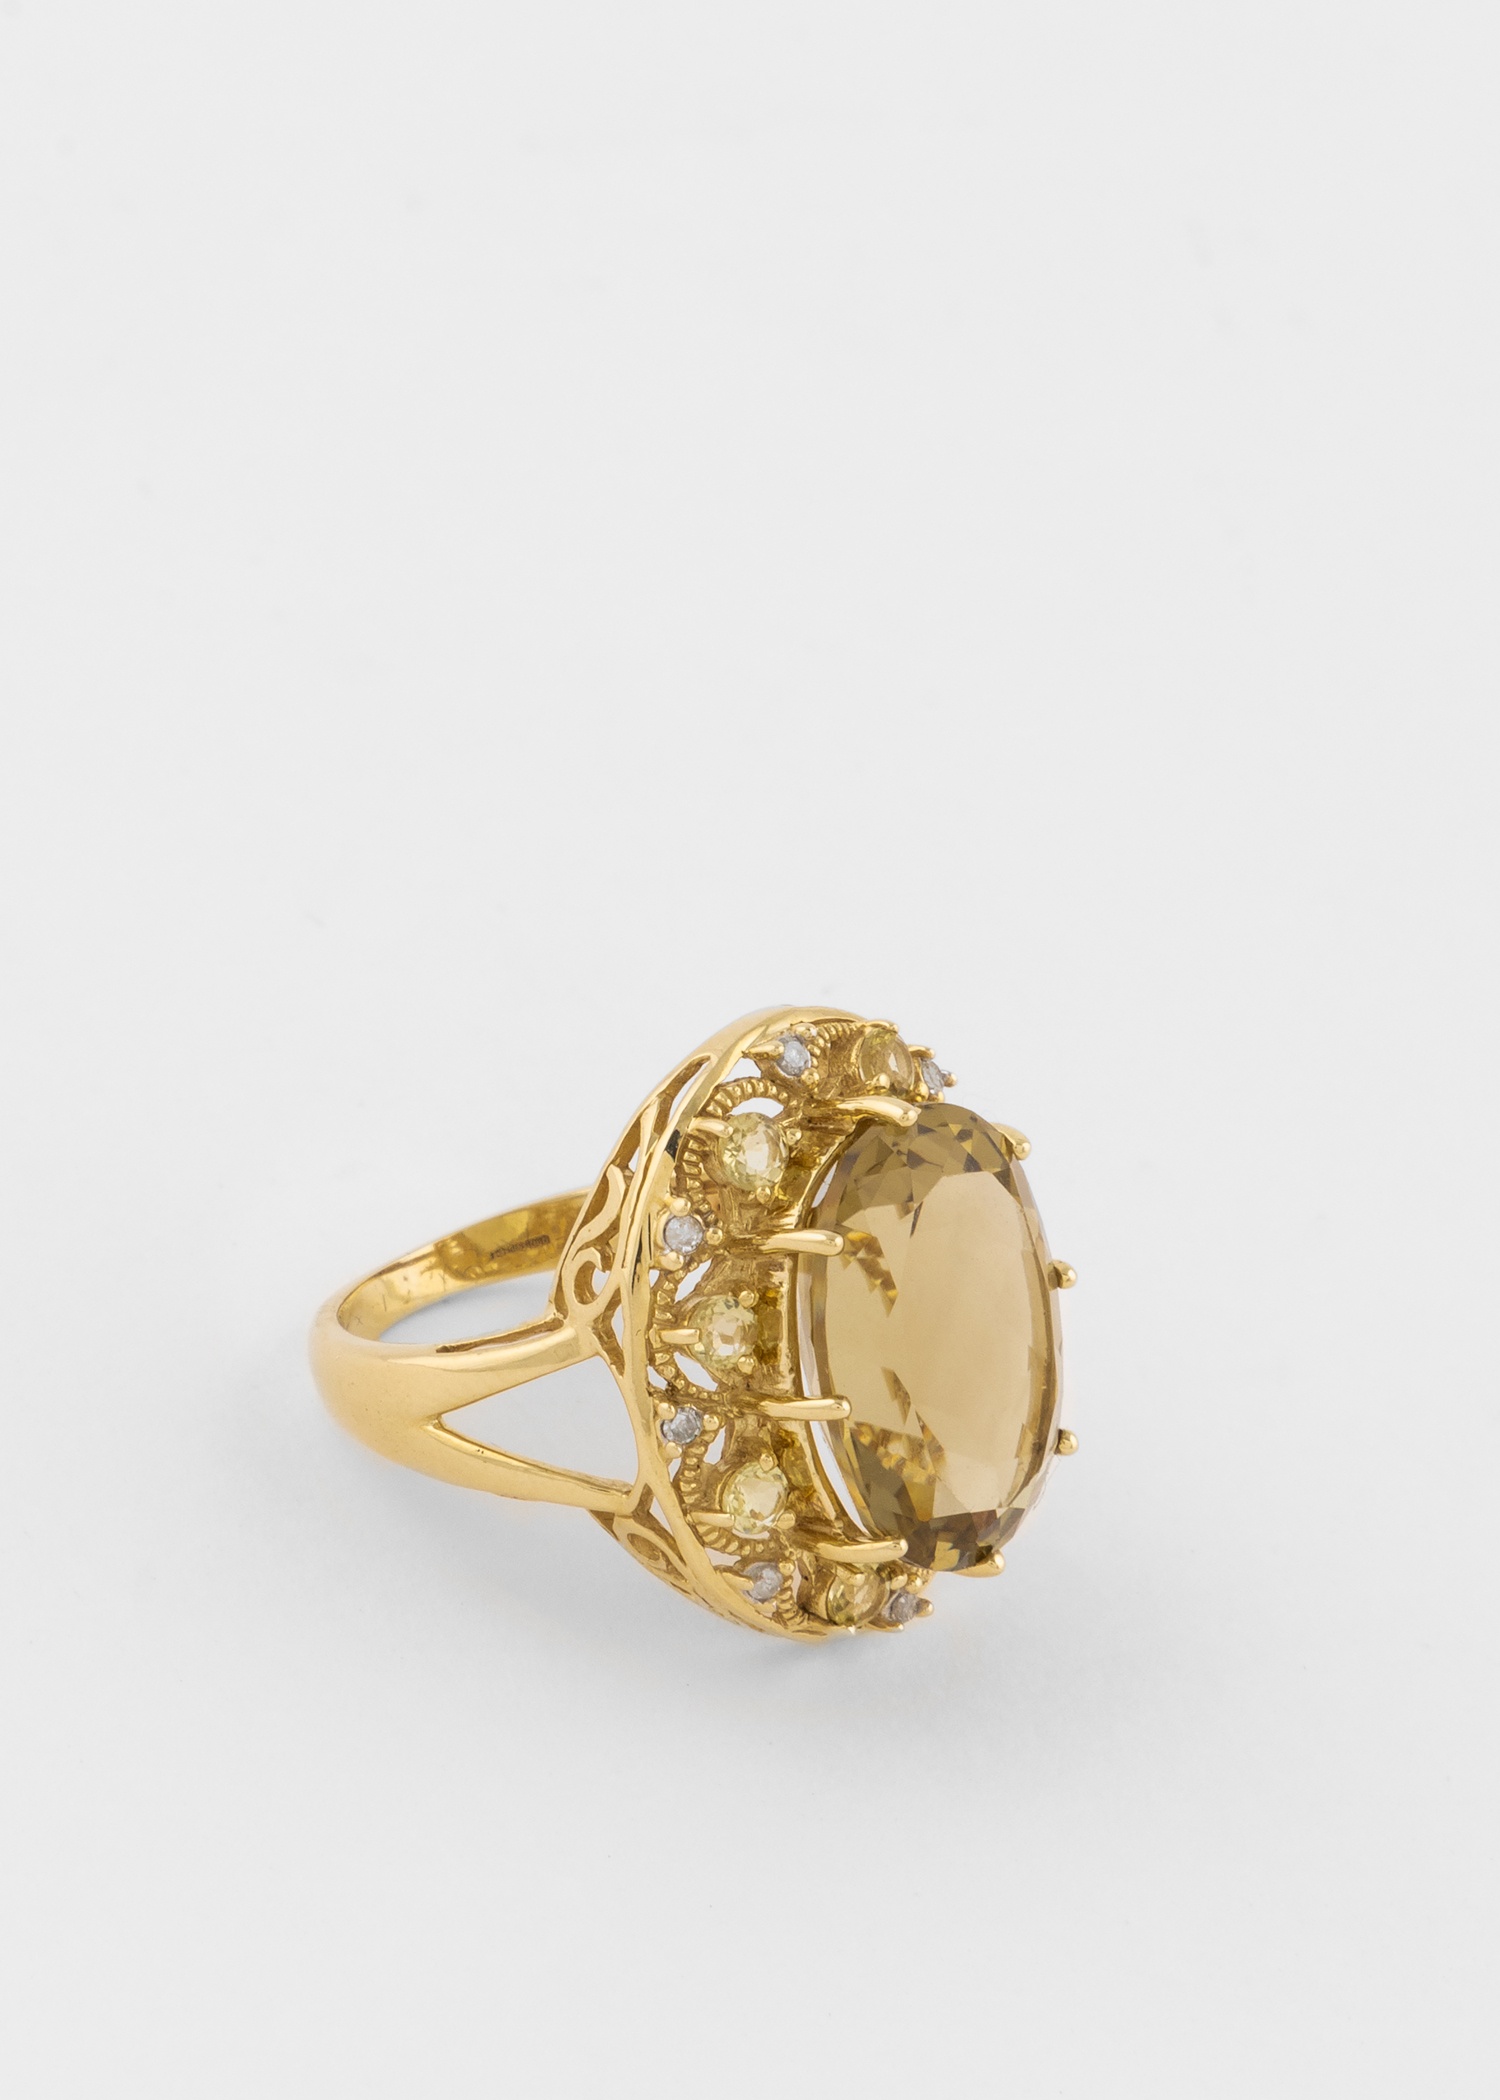 Diamond and Oro Verde Gold Cocktail Ring by Baroque Rocks - 2